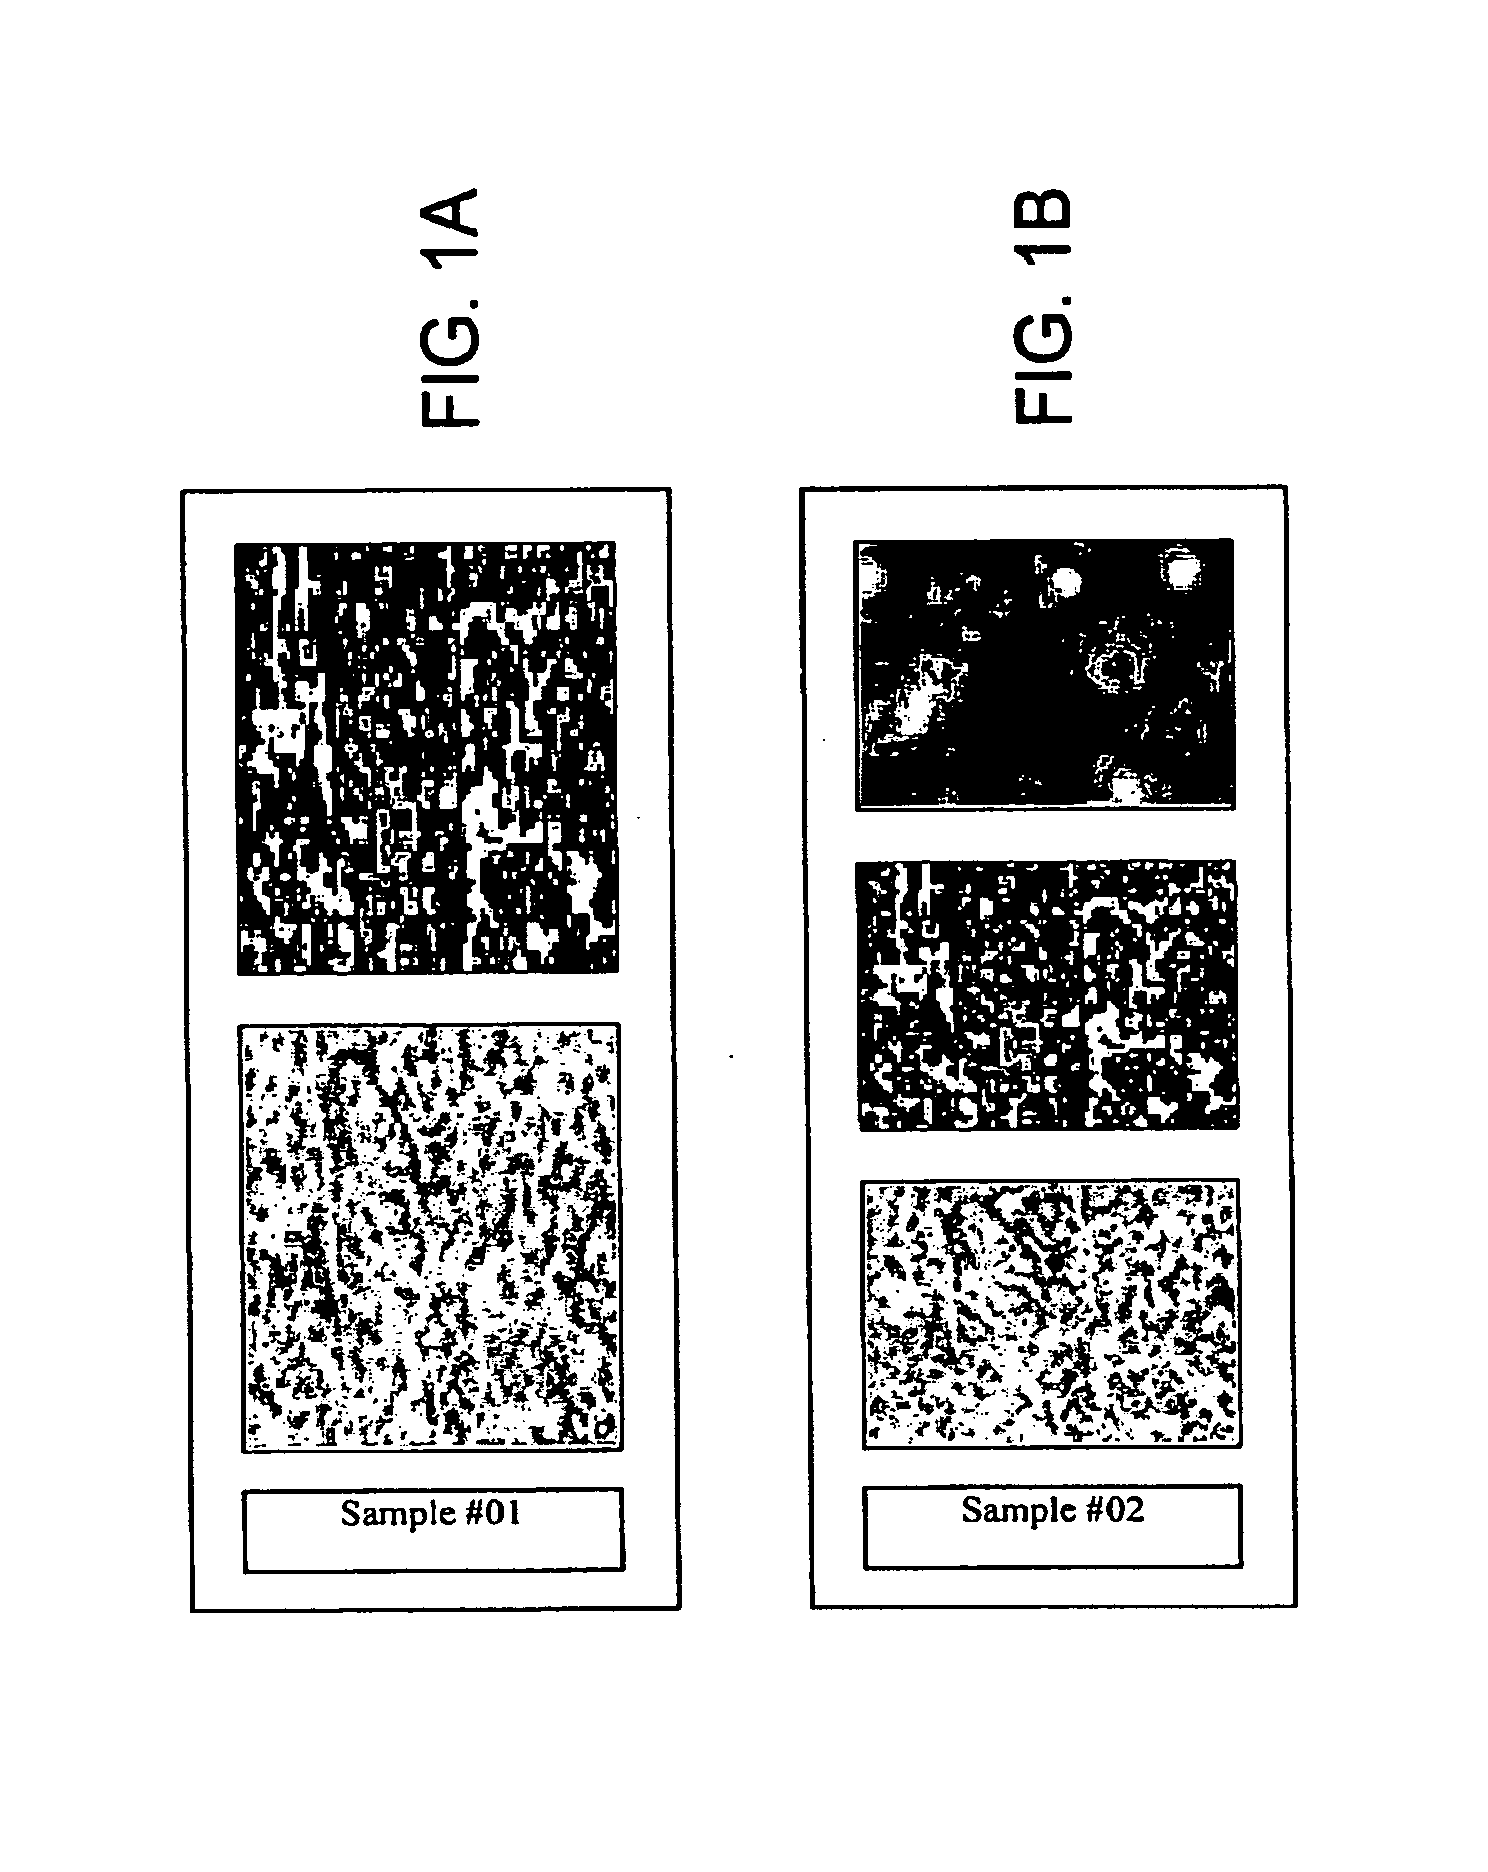 Method for Automated Tissue Analysis